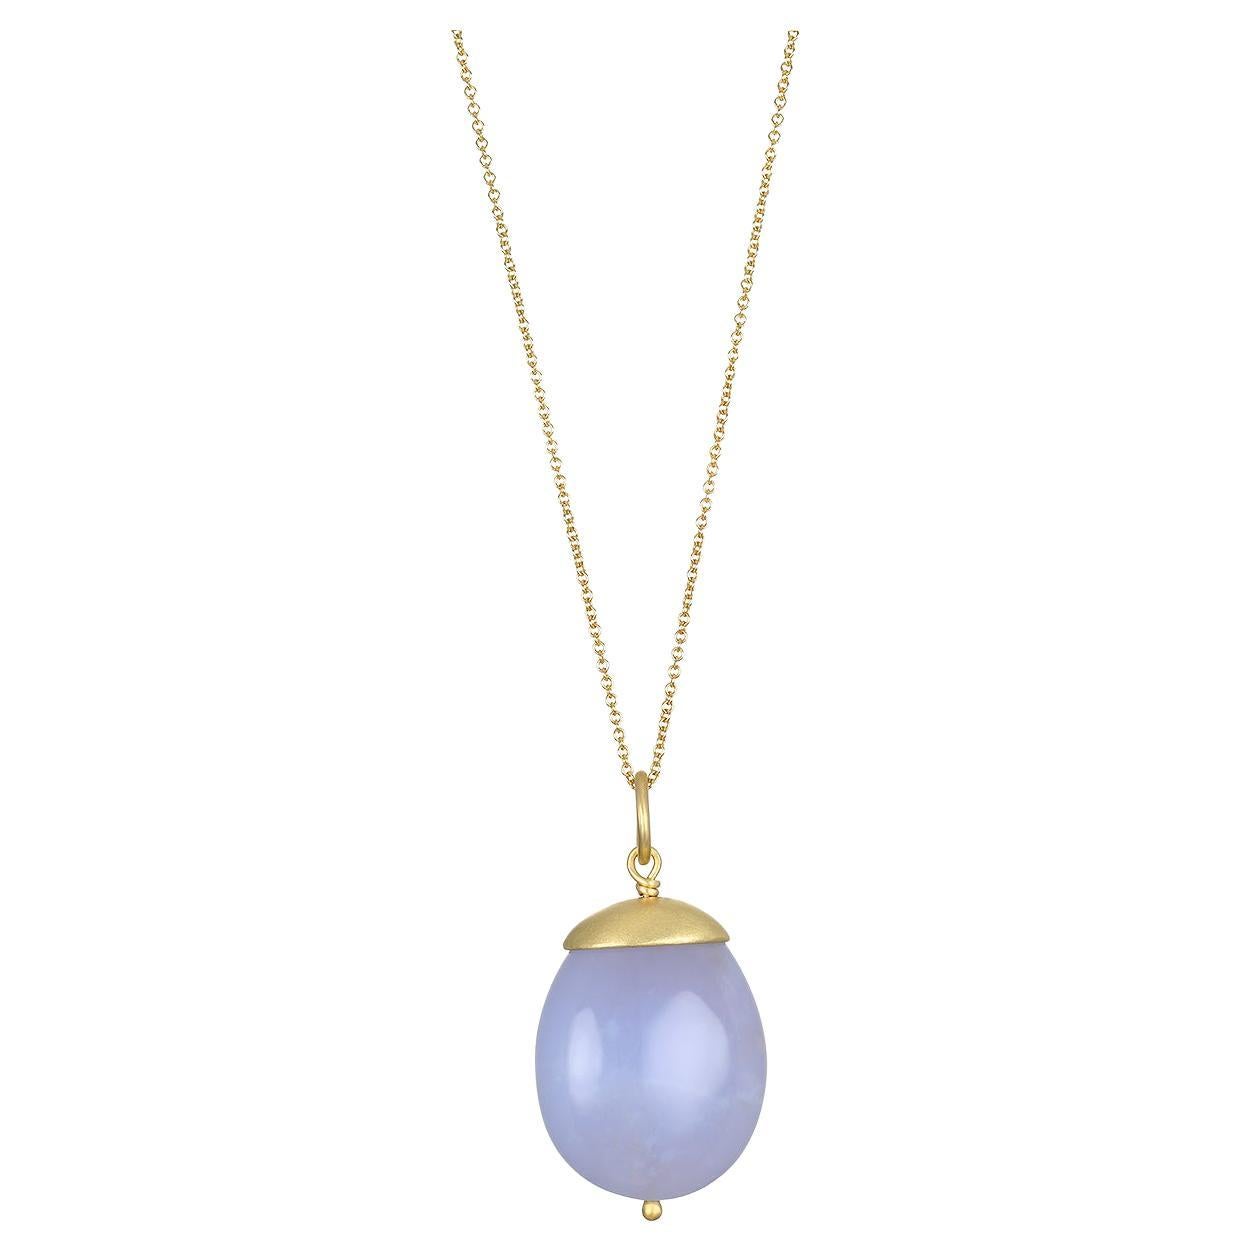 Faye Kim 18 Karat Gold Chalcedony Nugget Pendant with Cable Chain